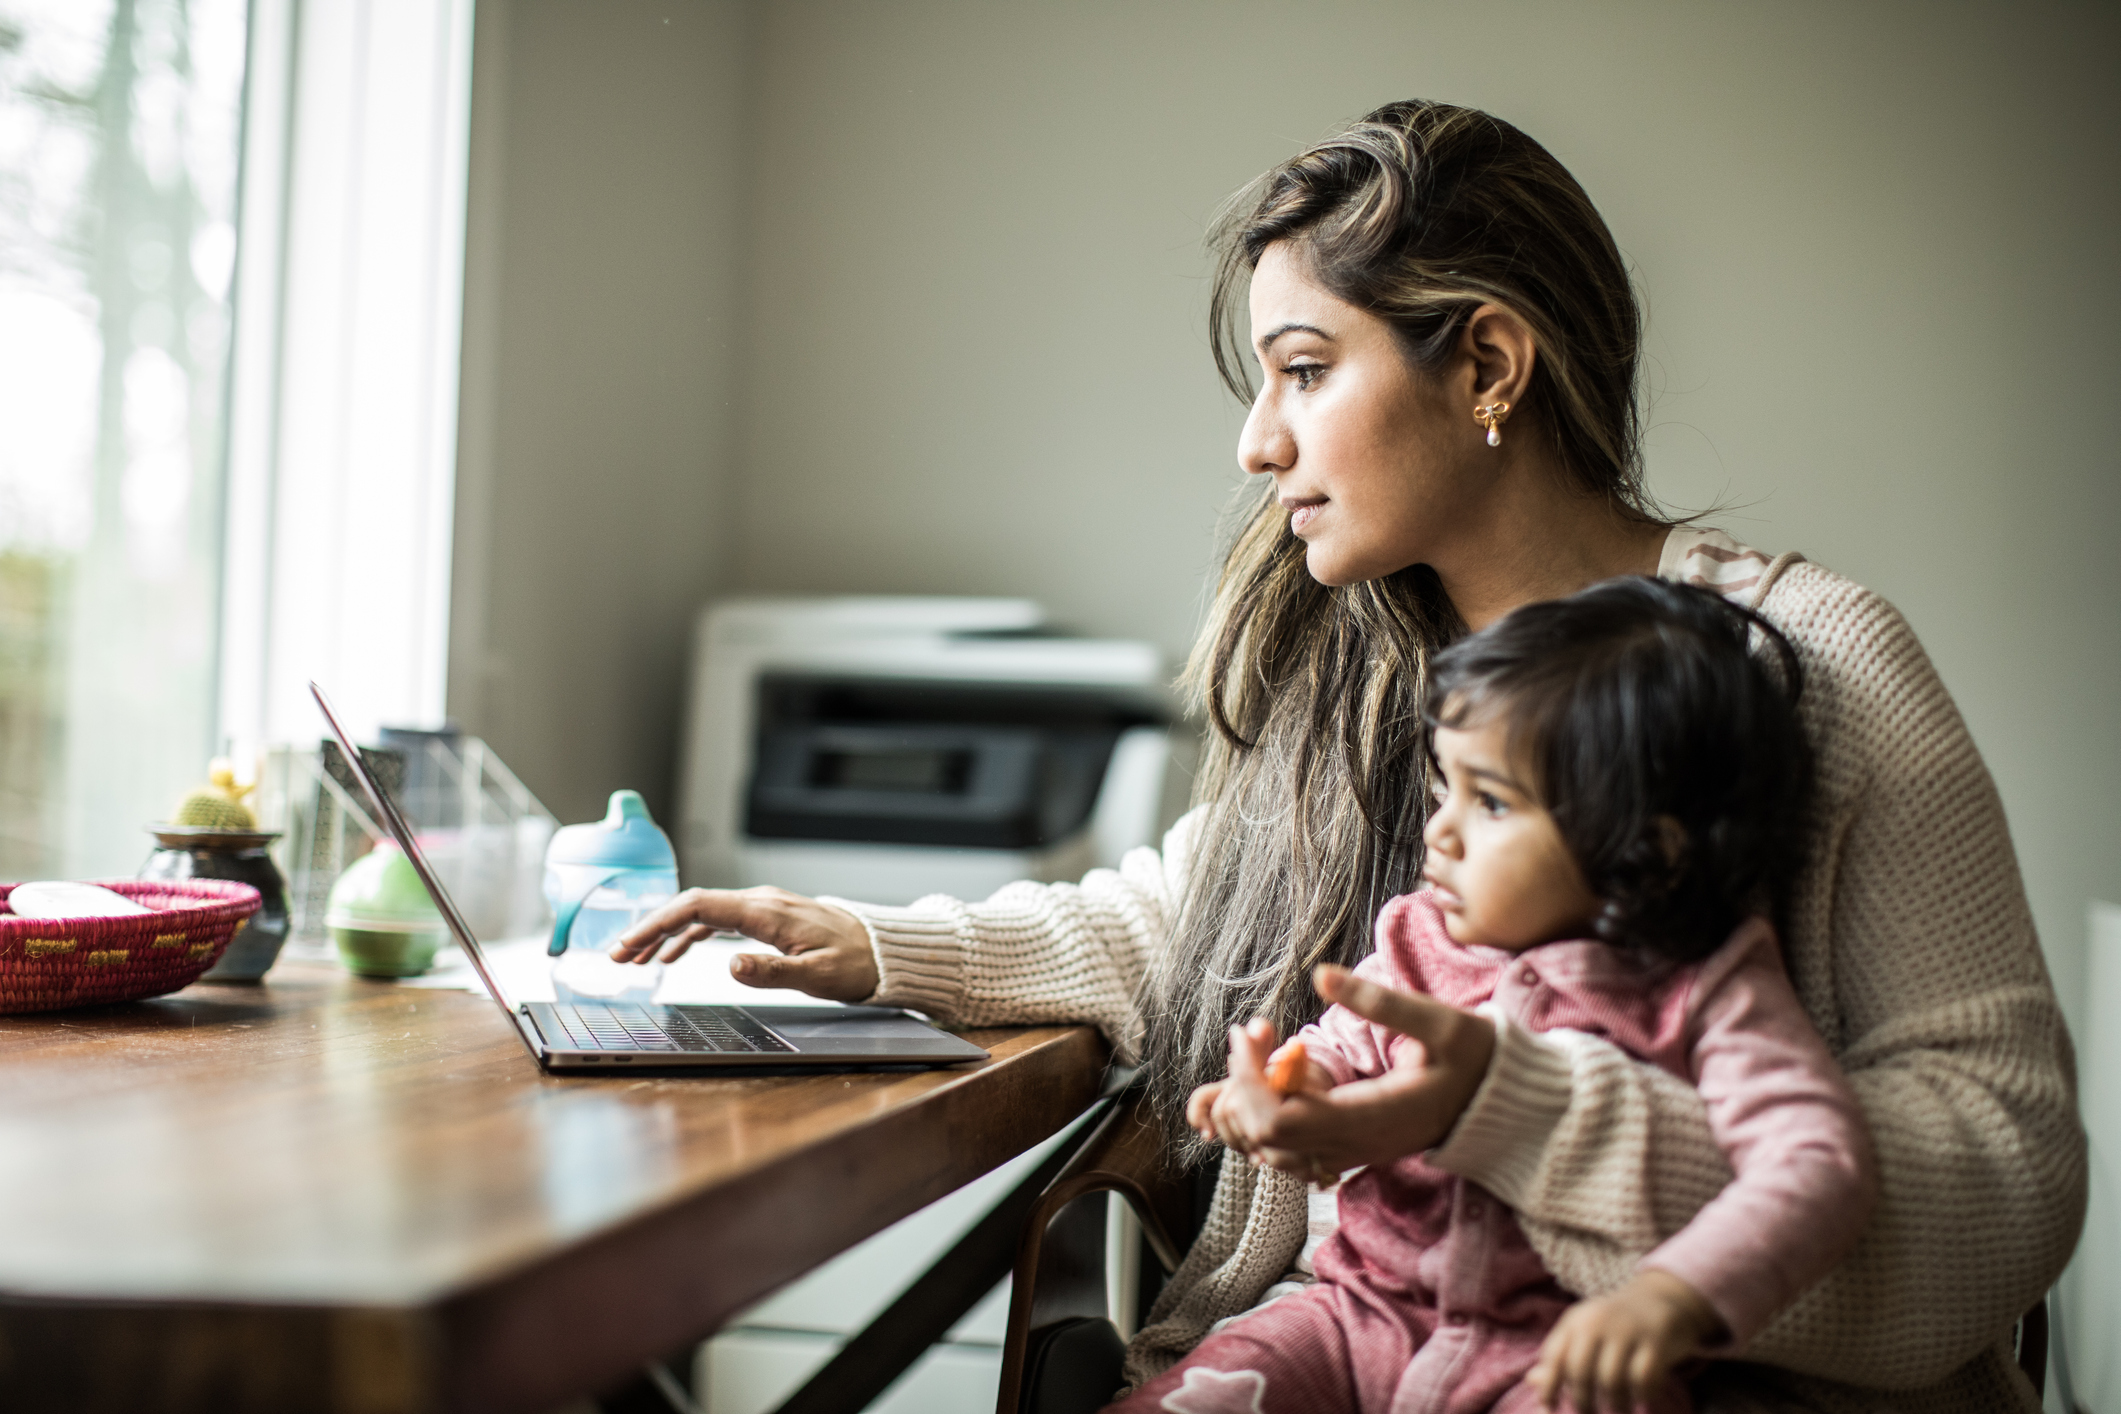 Many parents who could work from home adapted during the pandemic to juggling parenting and work (Getty Images)